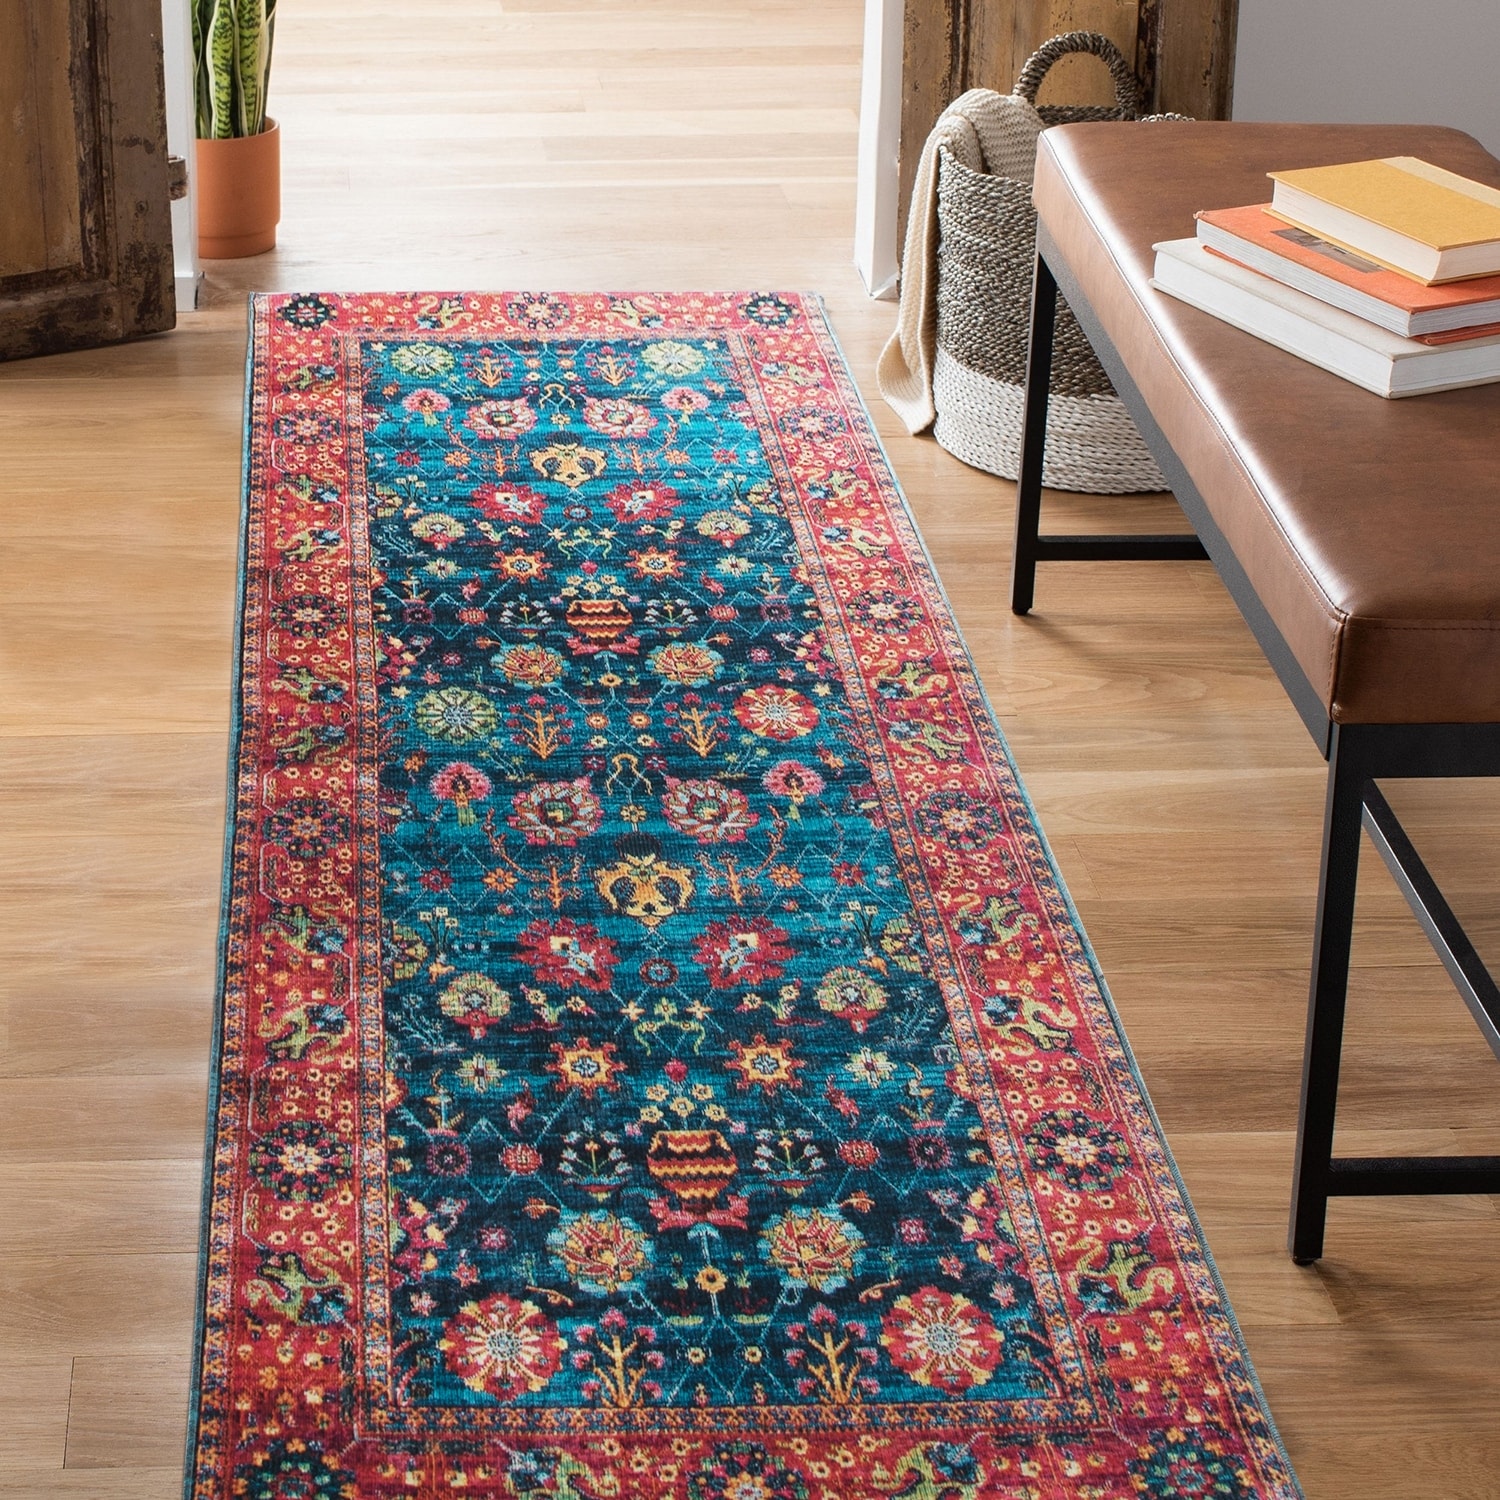 UrbanNest Rugs Traditional Vintage Non Slip Machine Washable Printed Area Rug, Blue Hot Pink